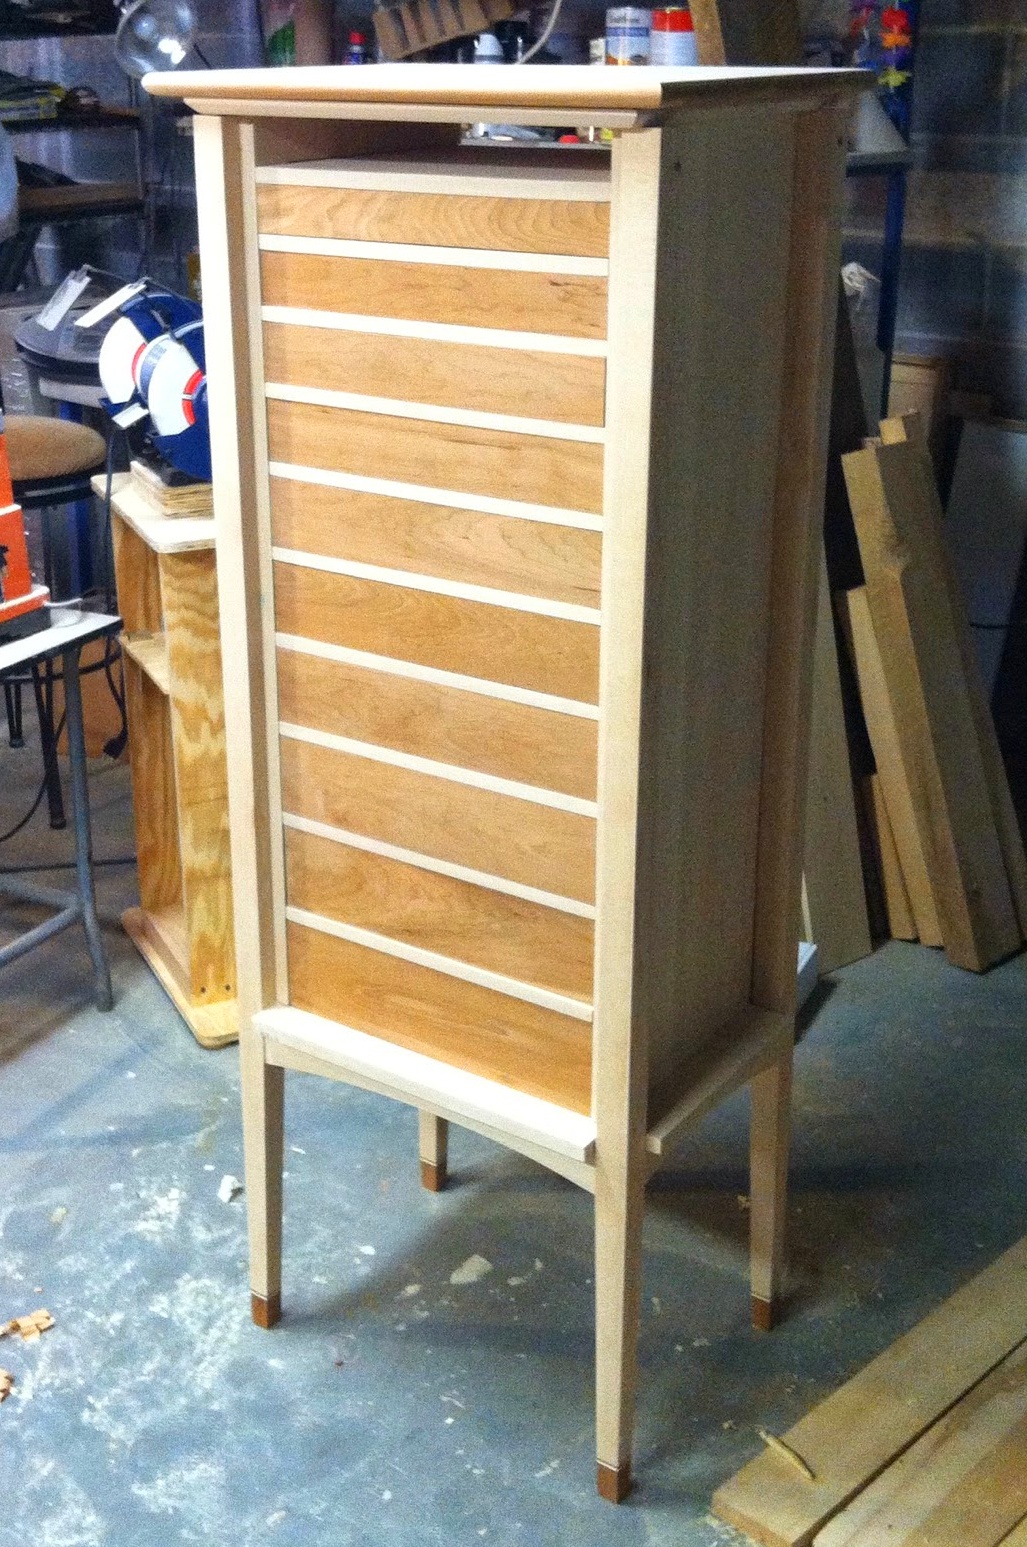 Cabinet with 10 drawers in place